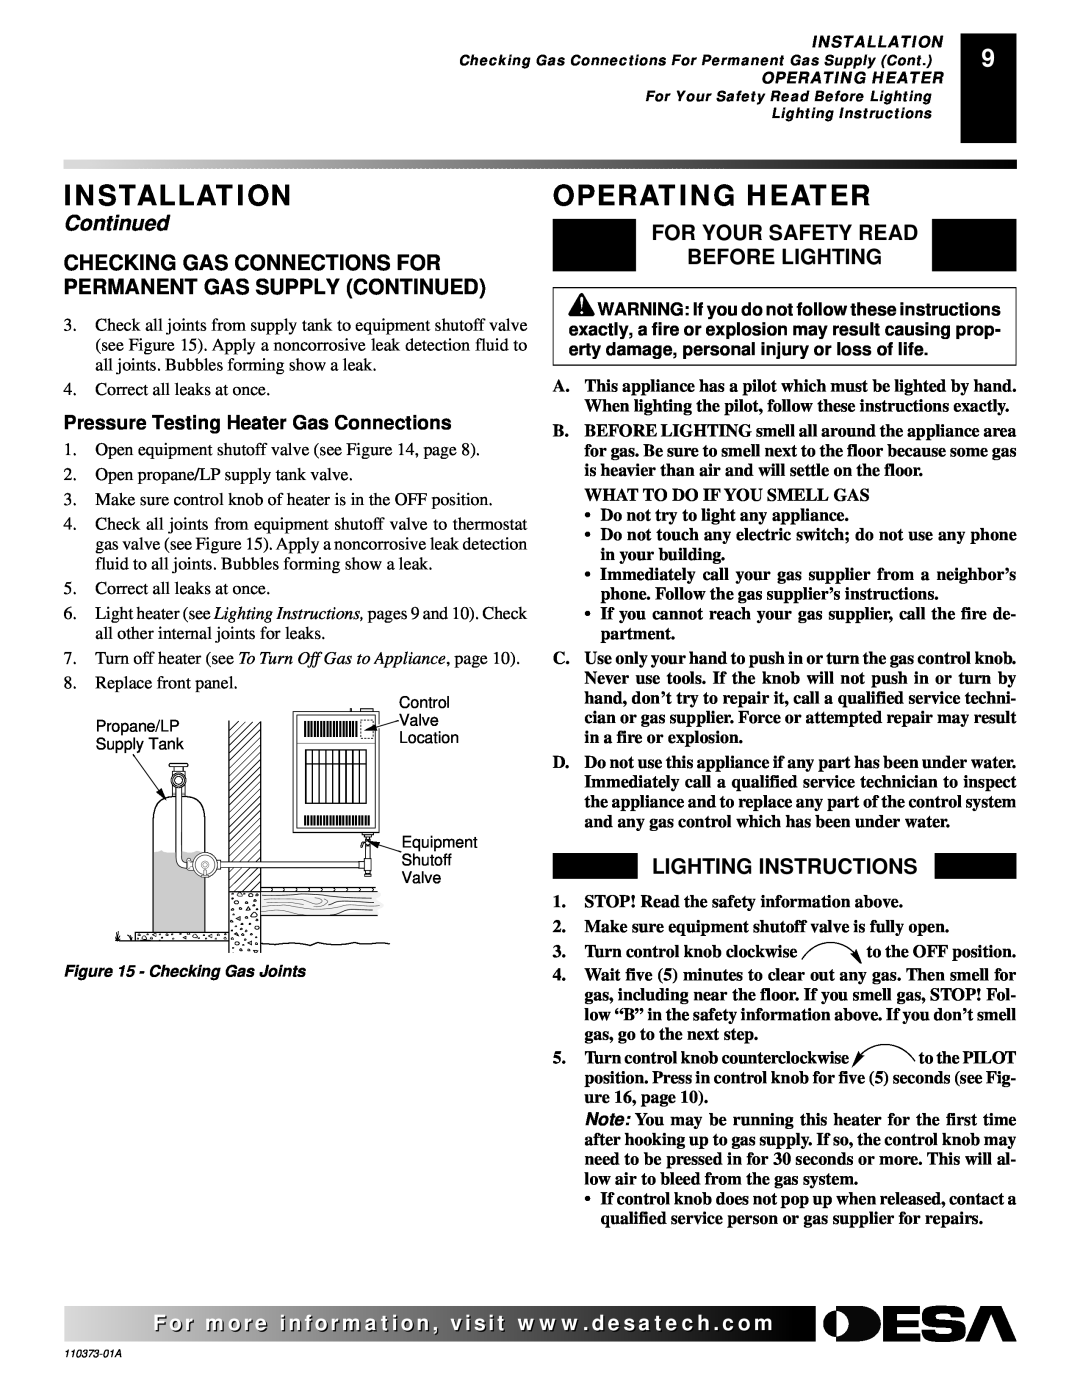 Desa REM10PT Operating Heater, Installation, Continued, For Your Safety Read Before Lighting, Lighting Instructions 